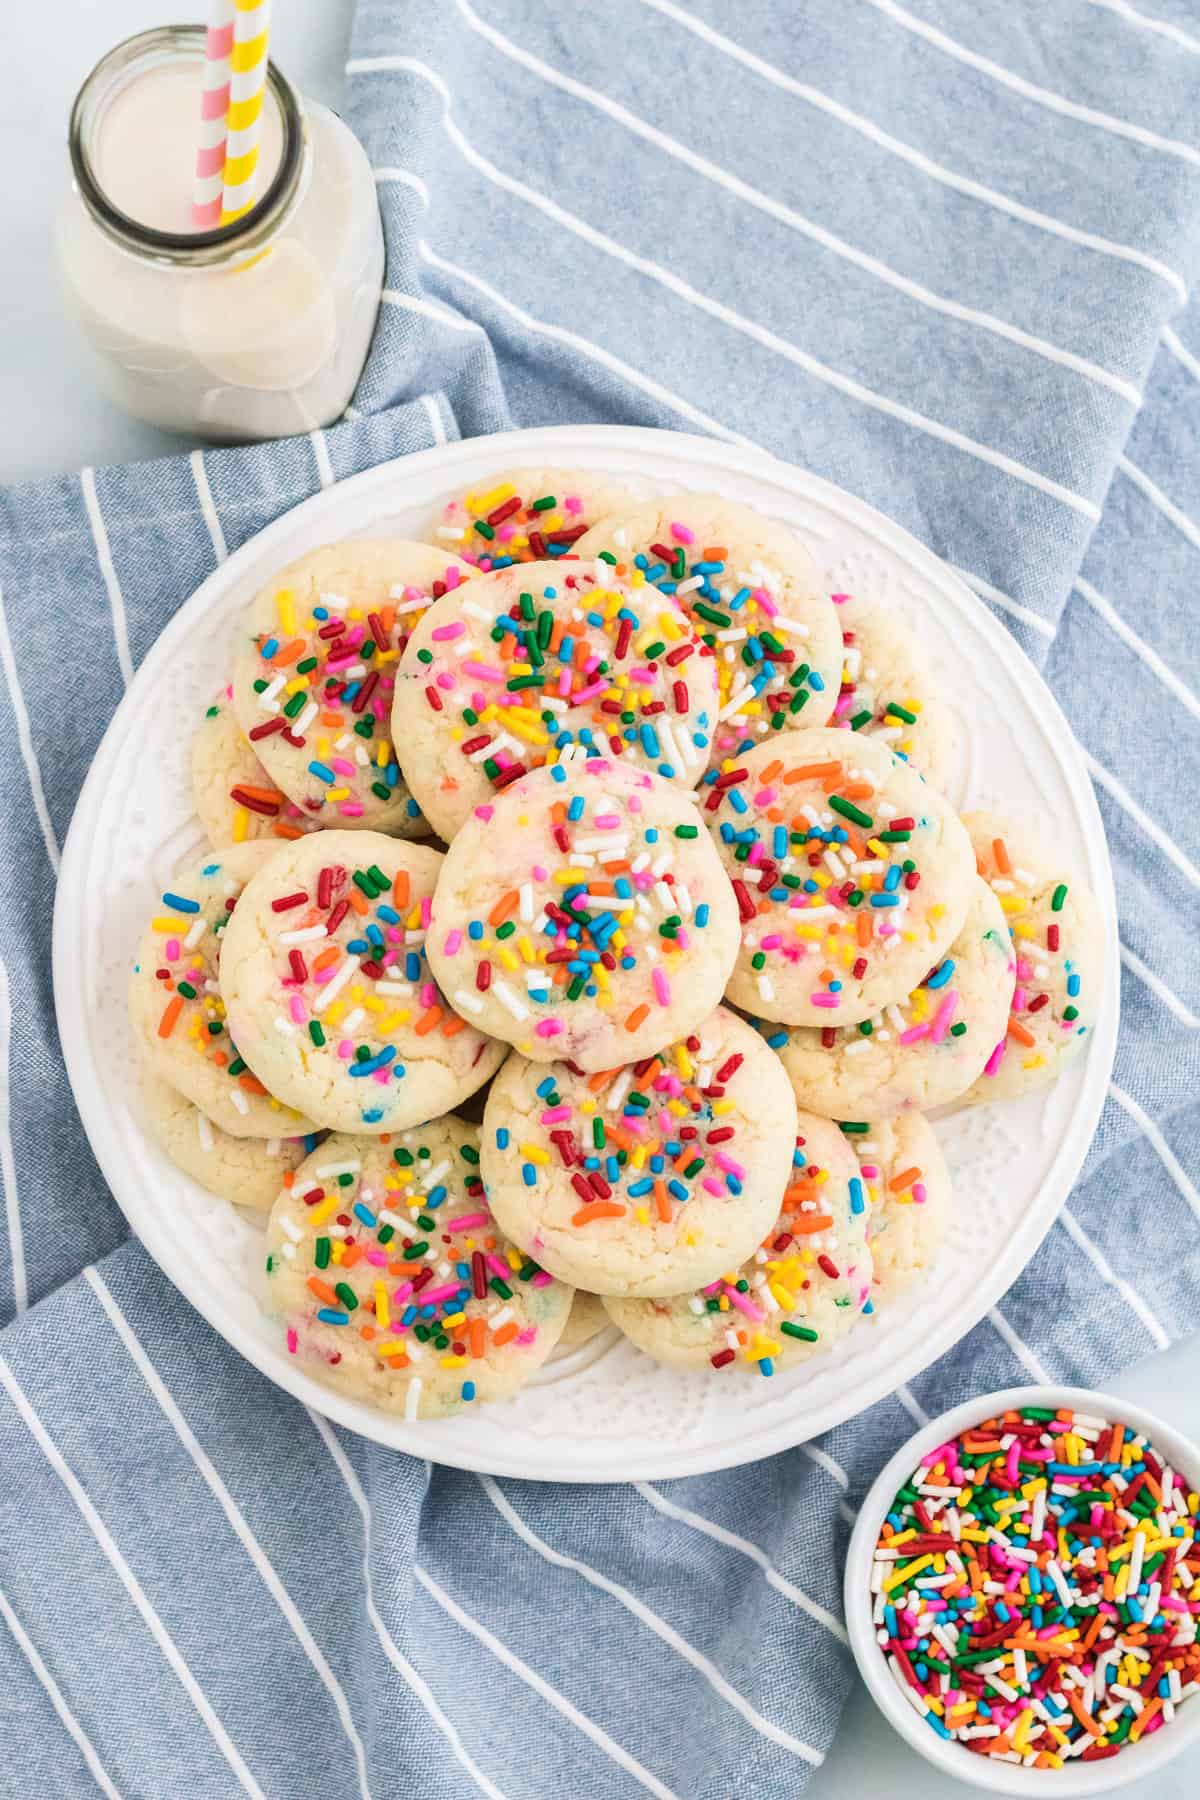 Funfetti cake mix cookies with rainbow sprinkles on a white plate with glass of milk and extra sprinkles beside them.